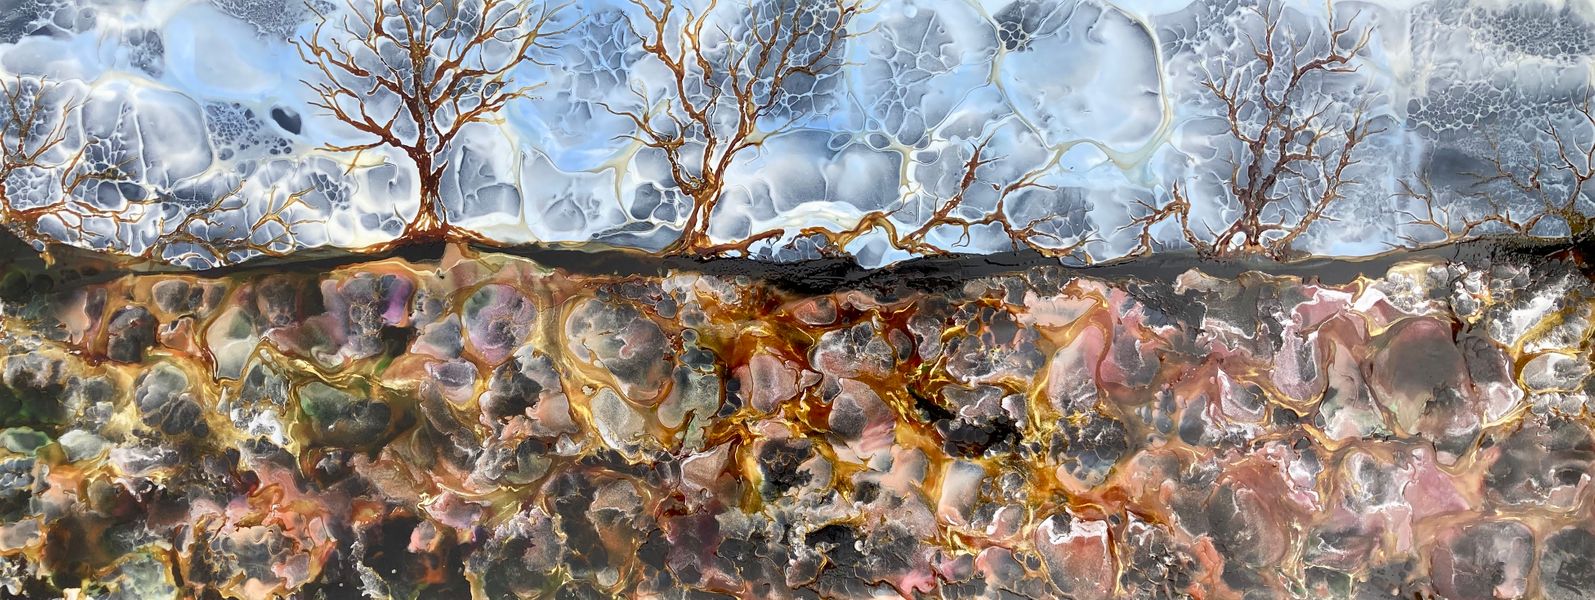 "The Frost Cometh..." - Phil Madley
Painted in encaustic wax